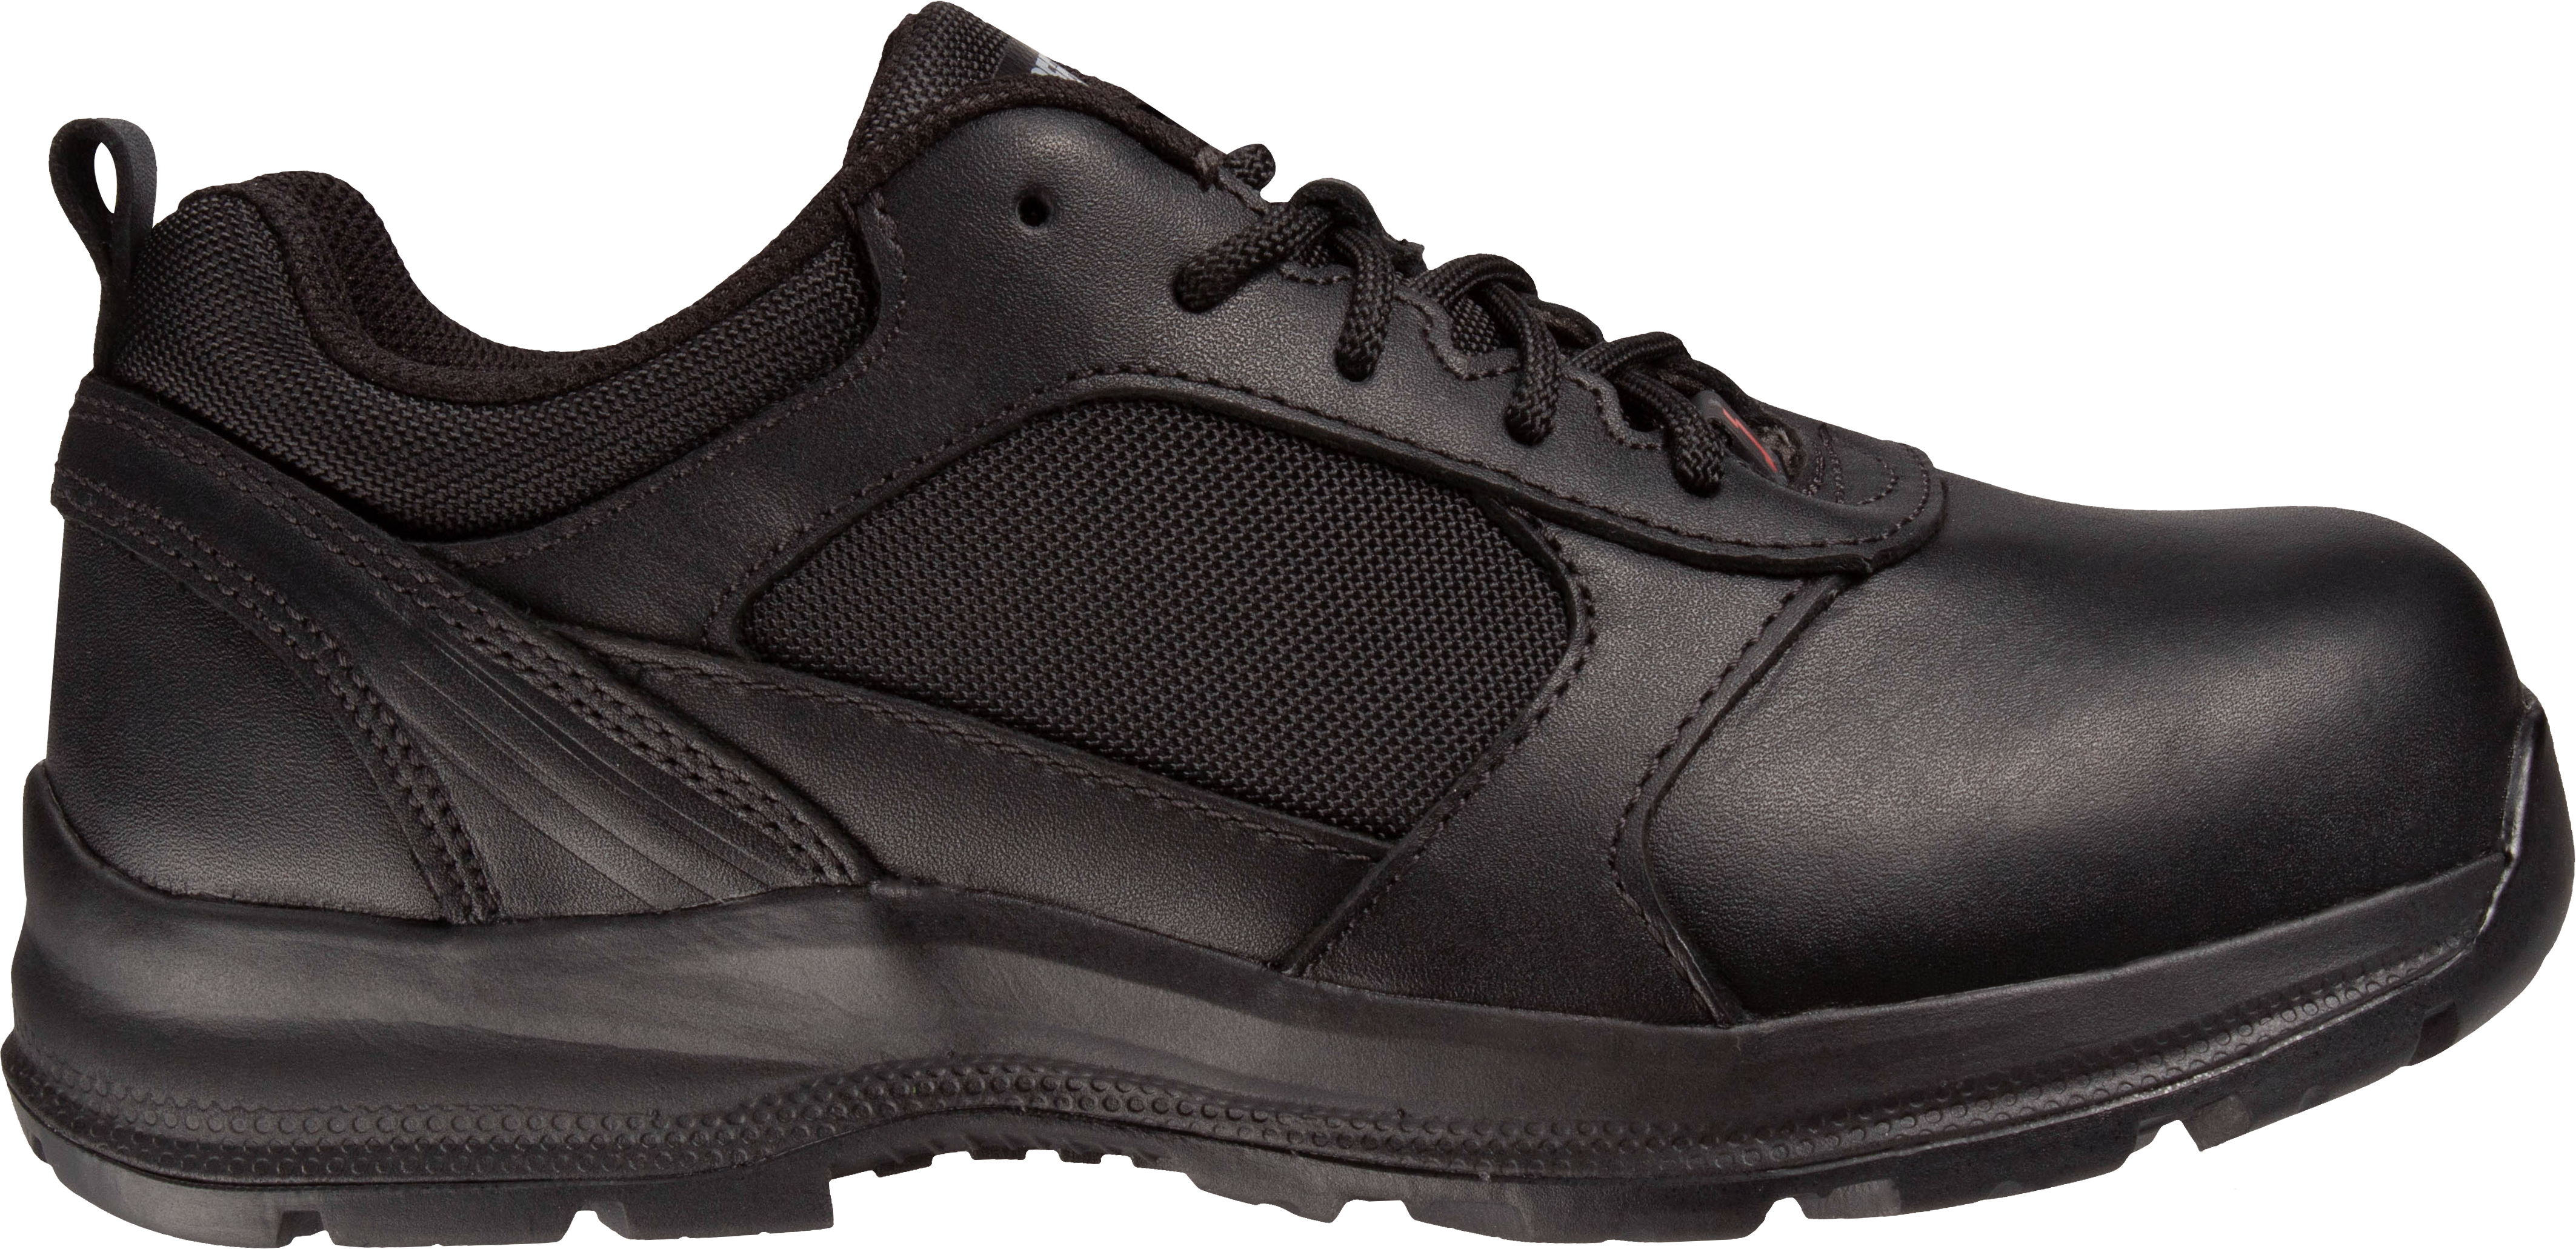 SAFETY JOGGER Chaussures Ultra légères Komodo S3 SRC ESD 